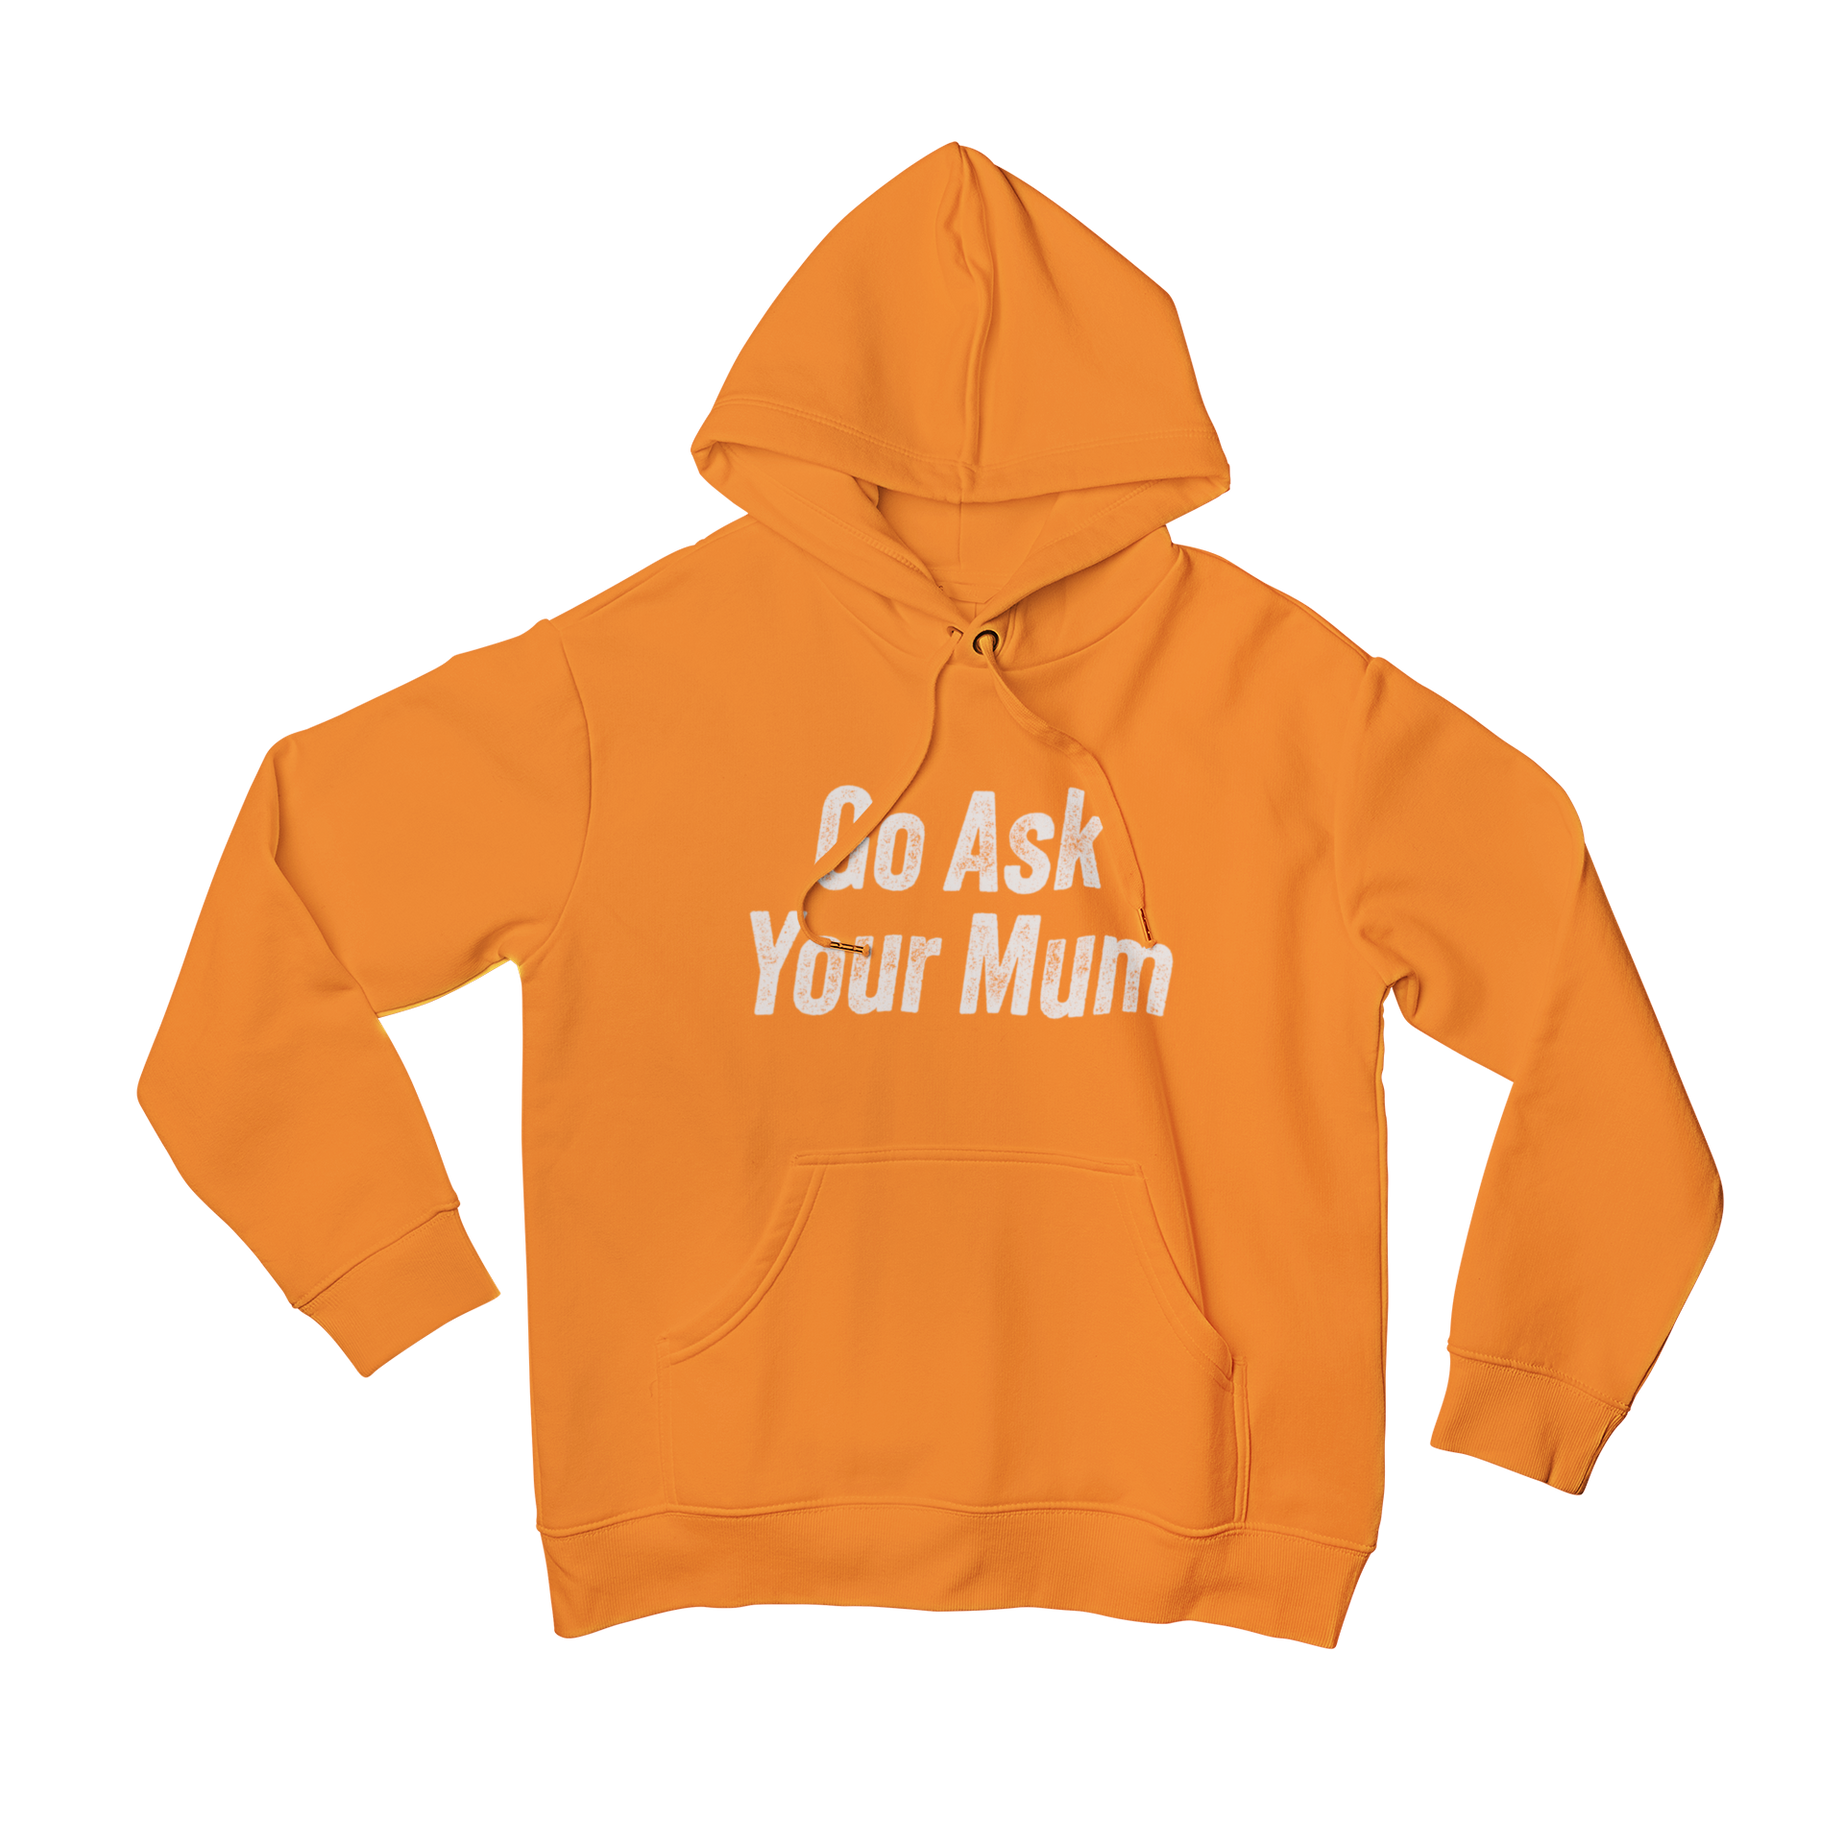 Expertly crafted with a matching slogan and bold lettering, our Ask Mum Hoodie is the perfect addition to your collection. Made to perfectly complement our Ask Dad Hoodie, this cozy and stylish sweatshirt is a must-have for any family. Trust us, moms know best.